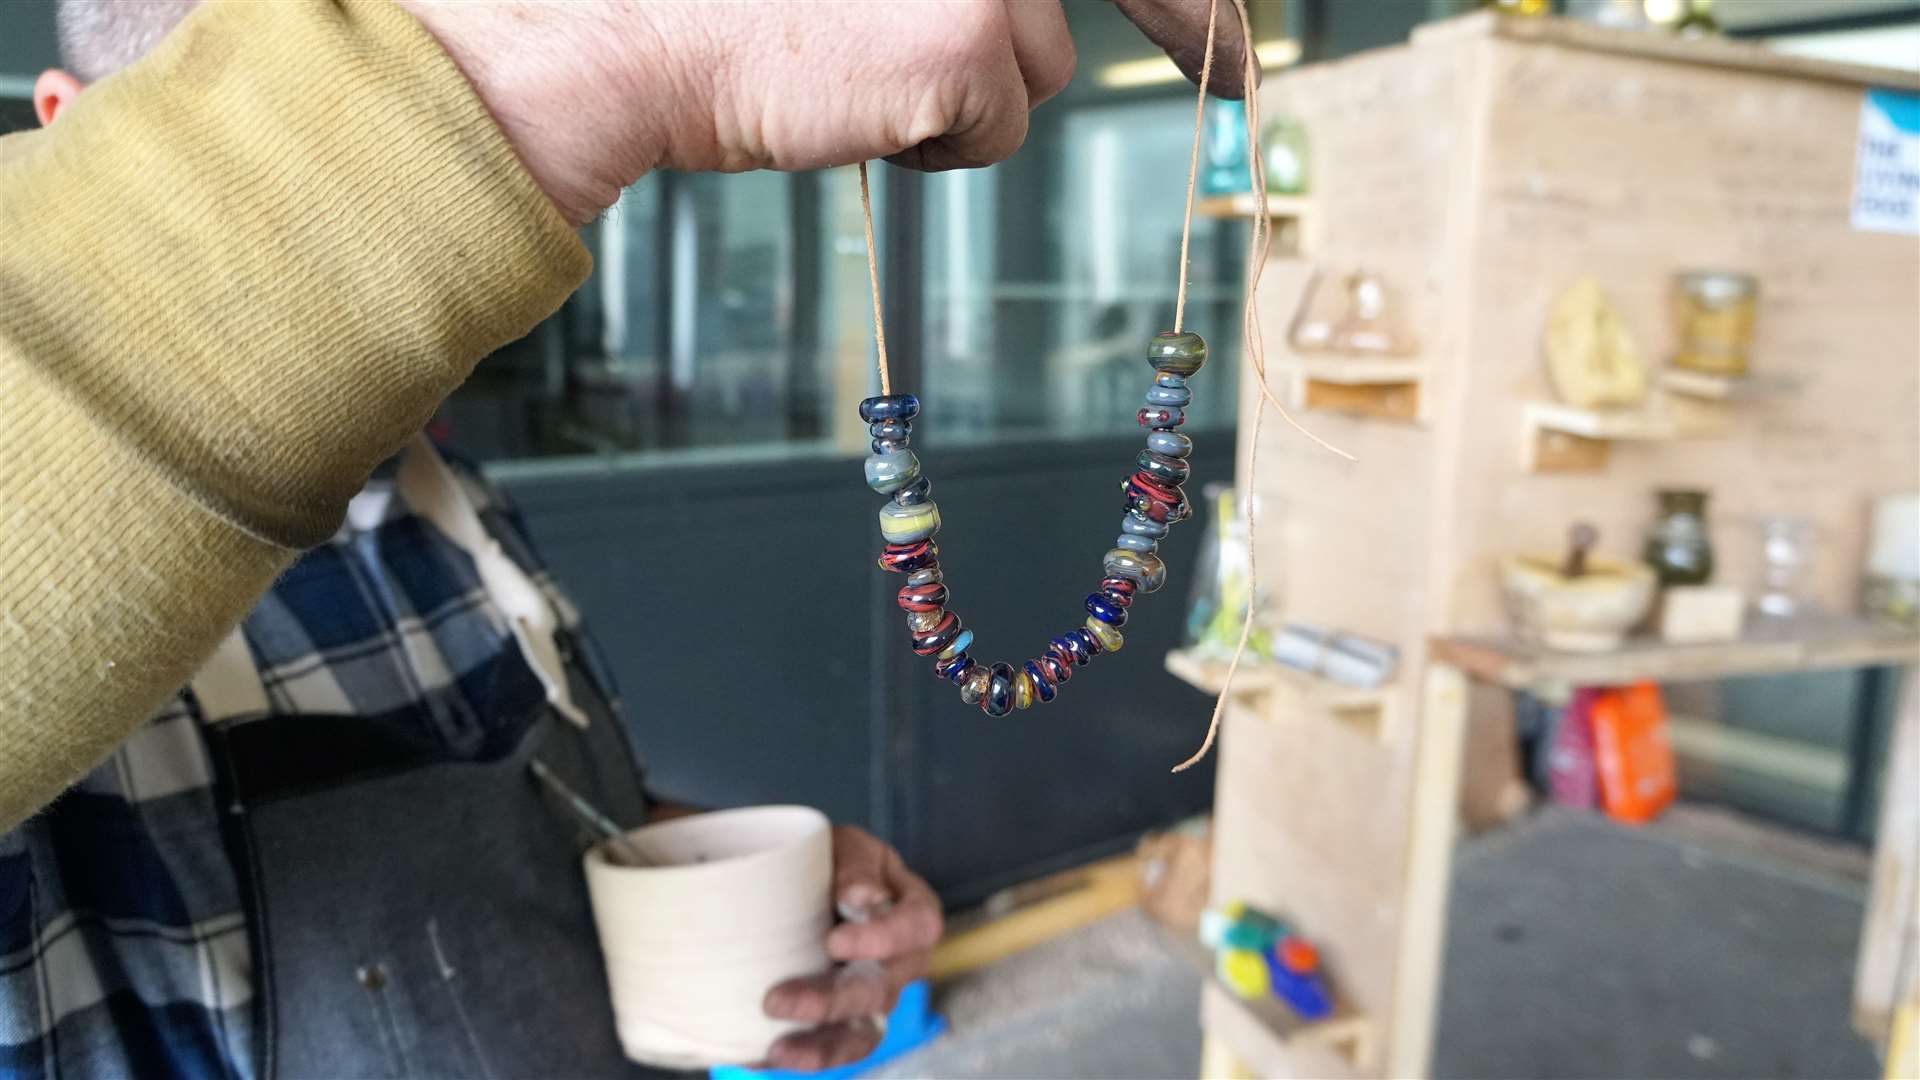 Michael Bullen shows of the glass beads he has created. Picture: DGS